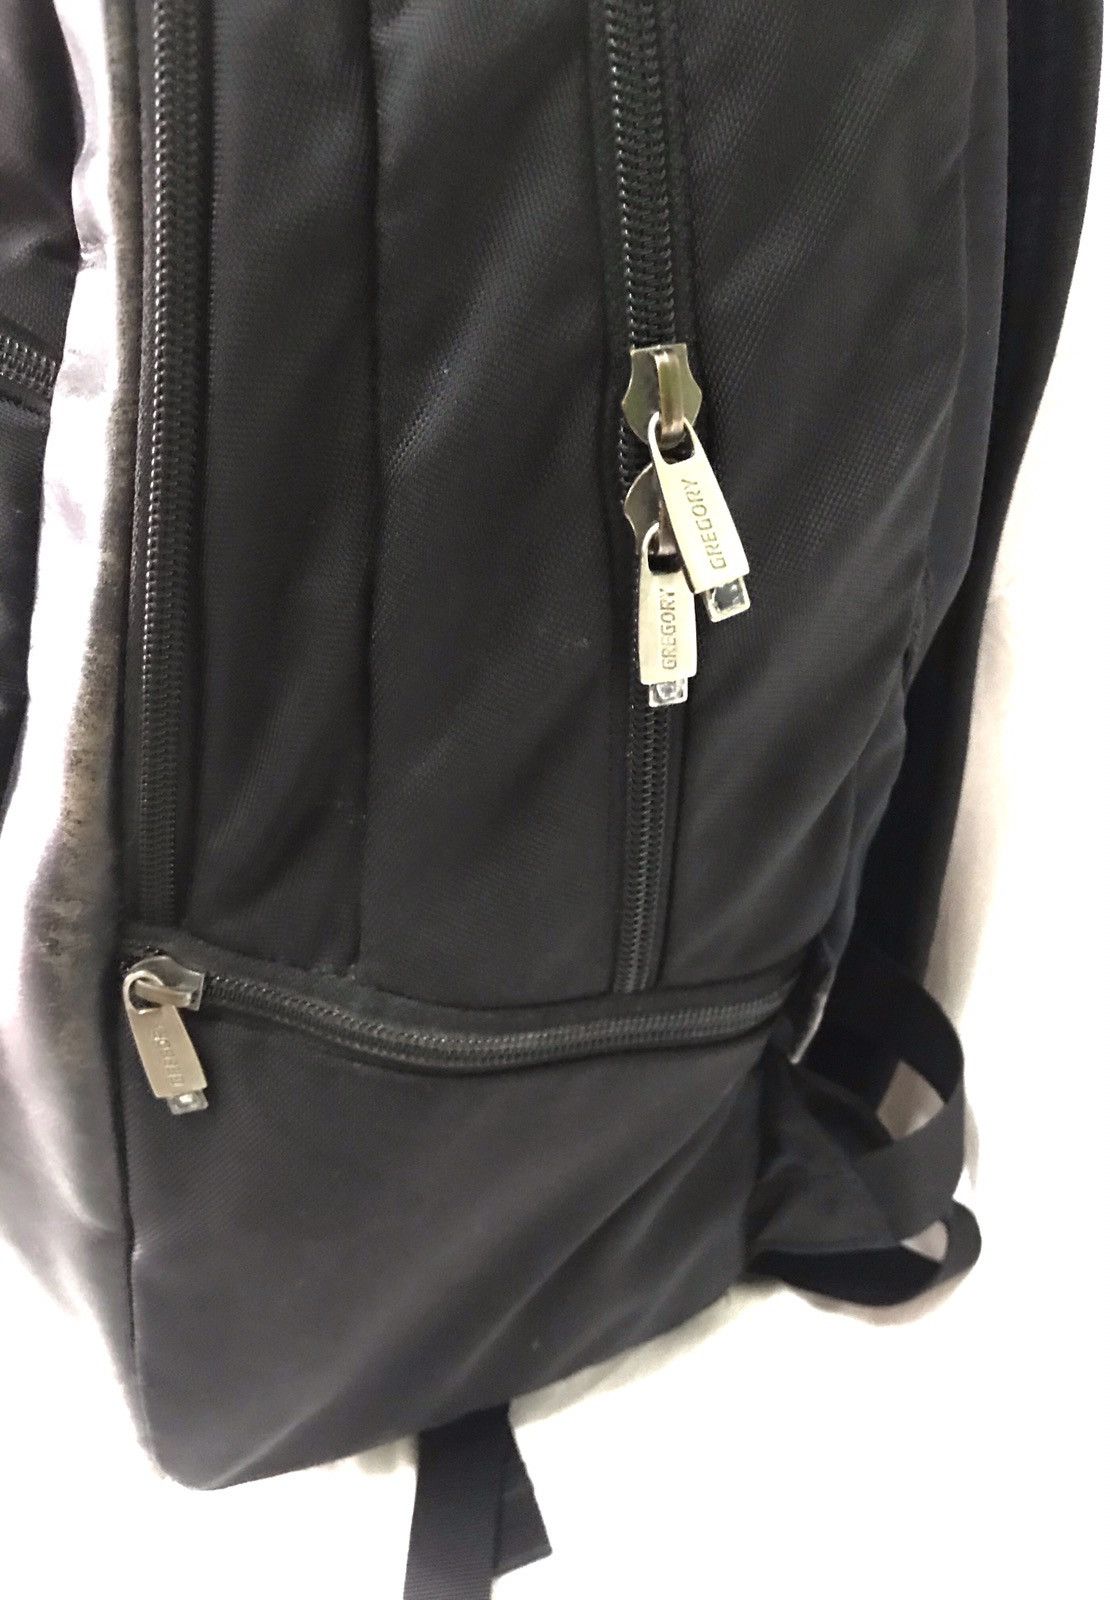 Authentic Gregory Laptop Size Backpack - 5